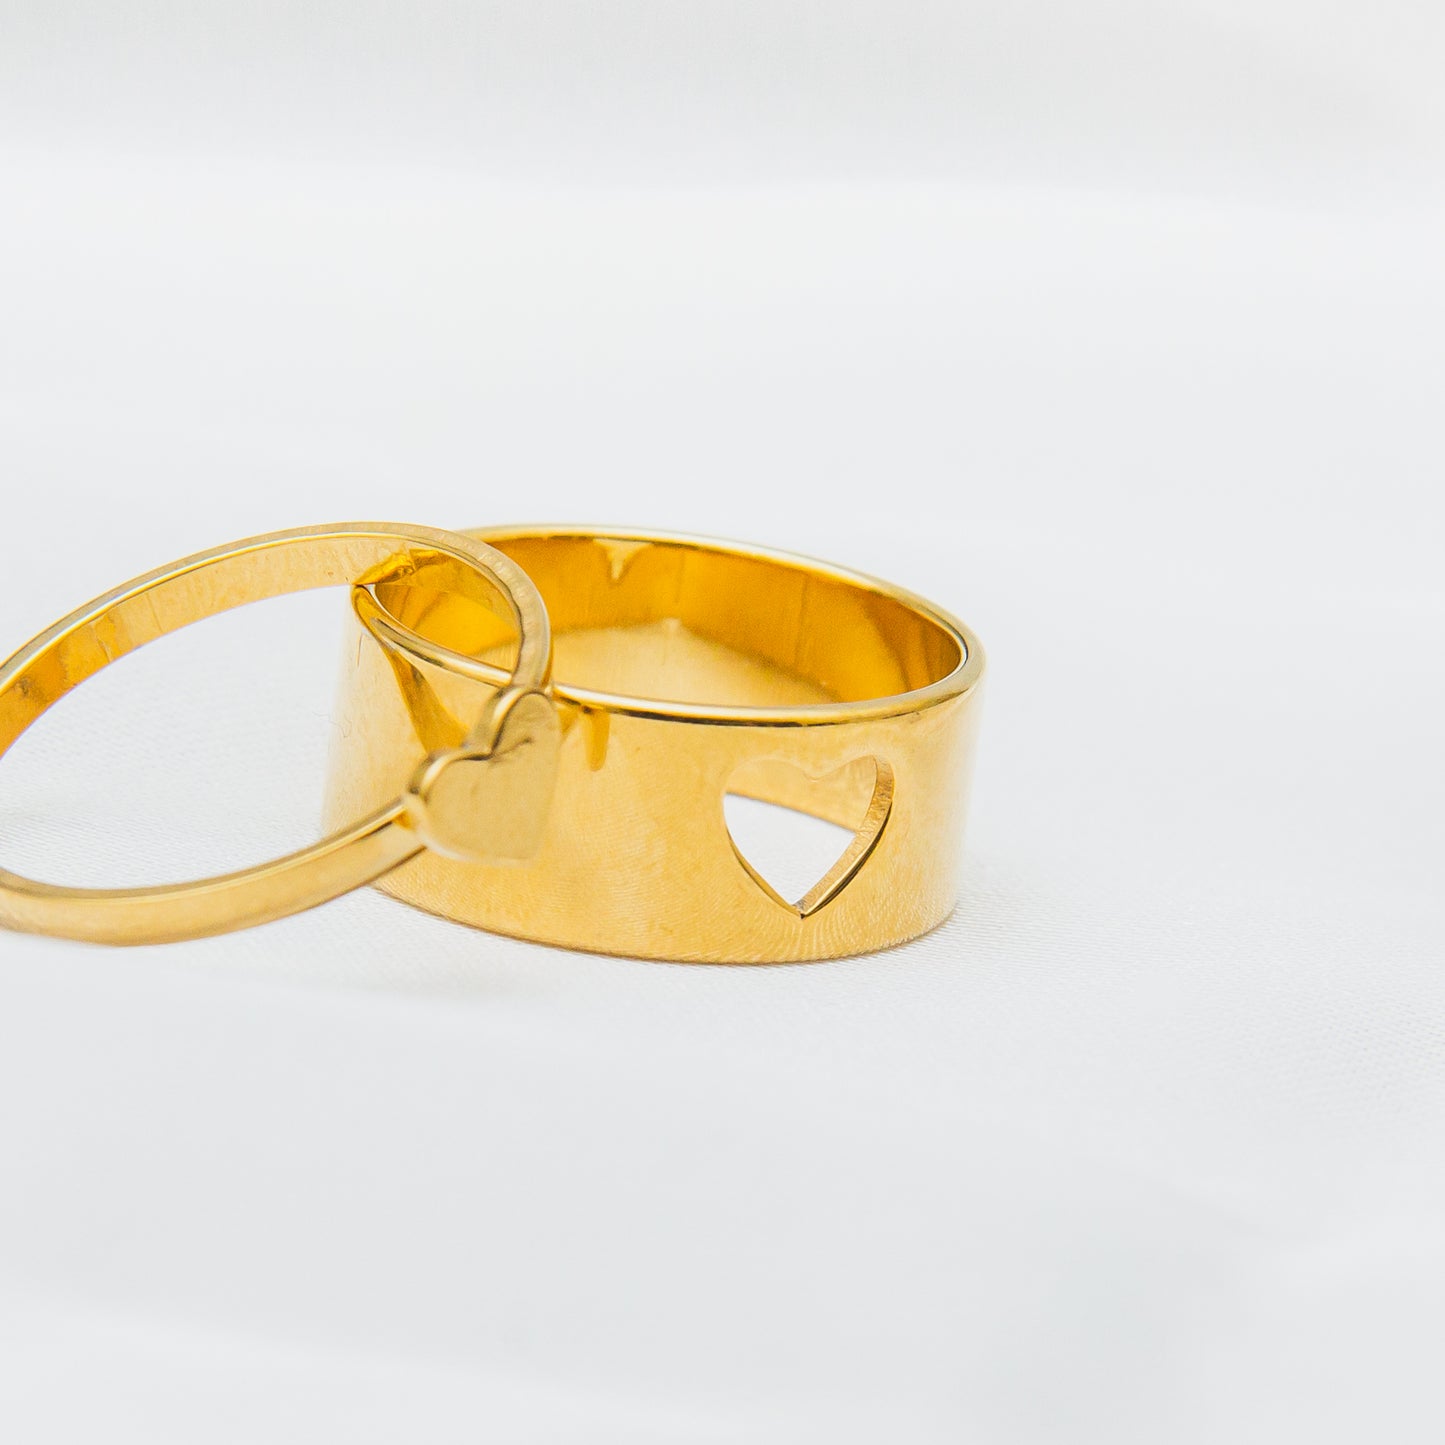 Two Souls Couple Rings - Gold